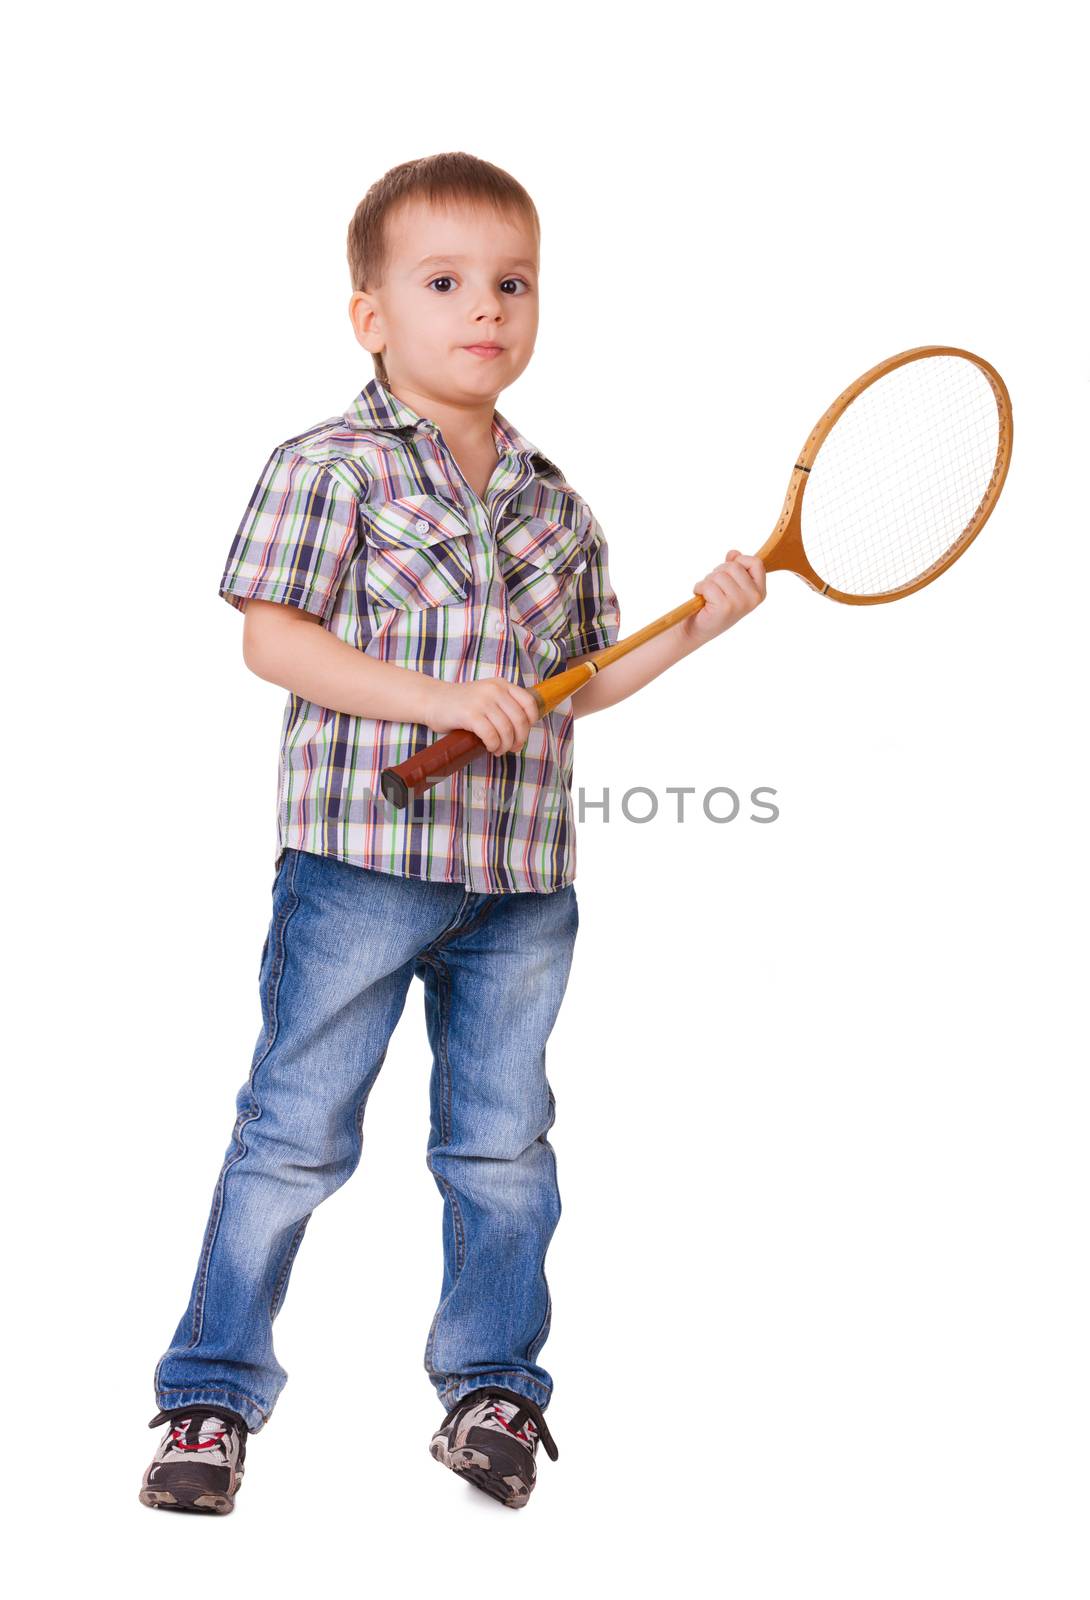 Little kid with badminton racket isolated on white background 